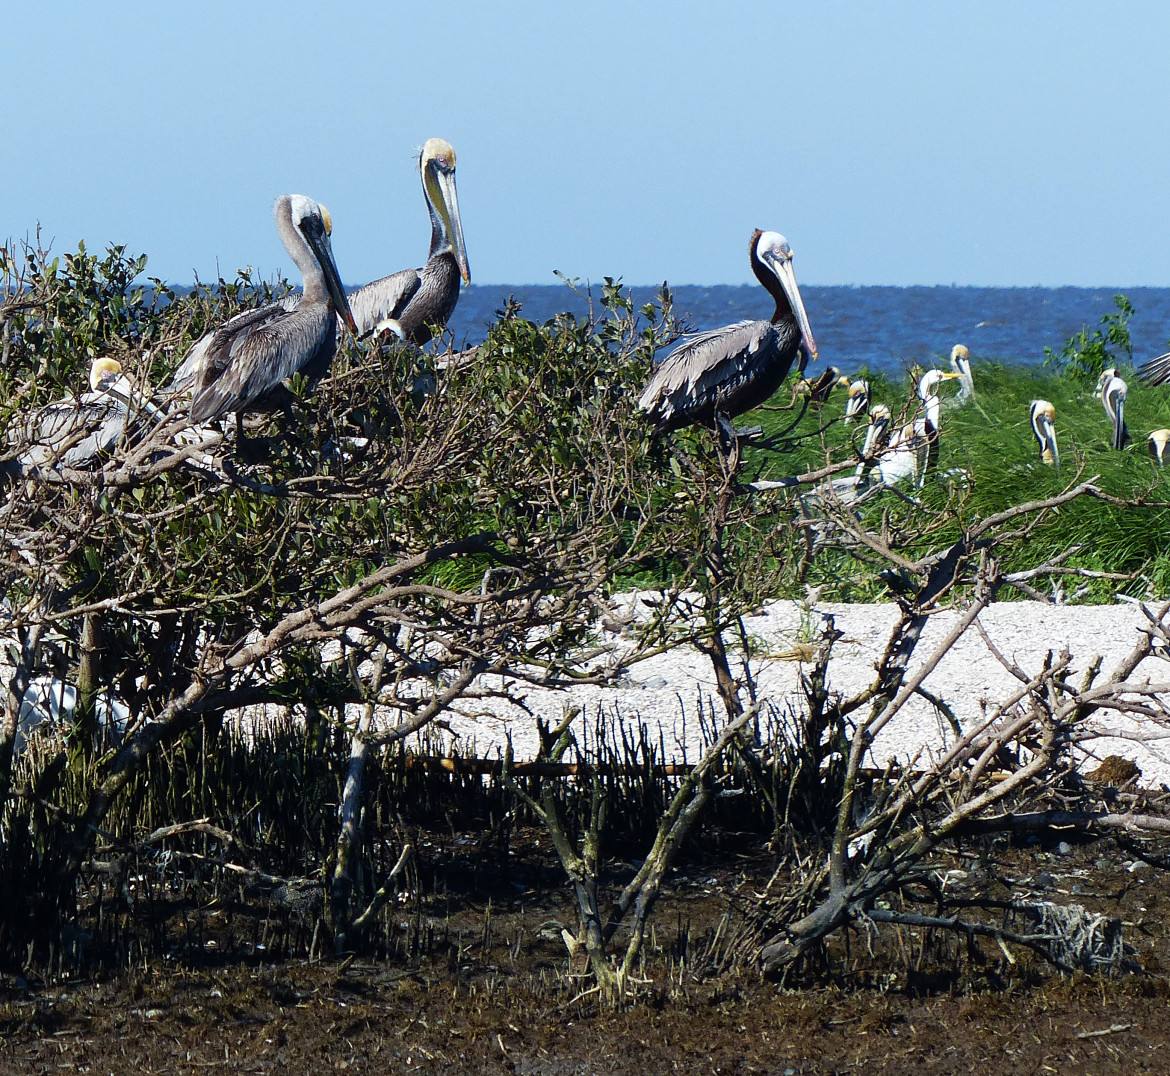 The one island still large and high enough to hold mangroves is still used by several hundred pelicans, roseate spoonbills, herons and other birds. But as this image shows, some of the mangroves are still dying from the oil. Before the spill, officials estimated about 10,000 pelicans and other birds used the barrier islands.